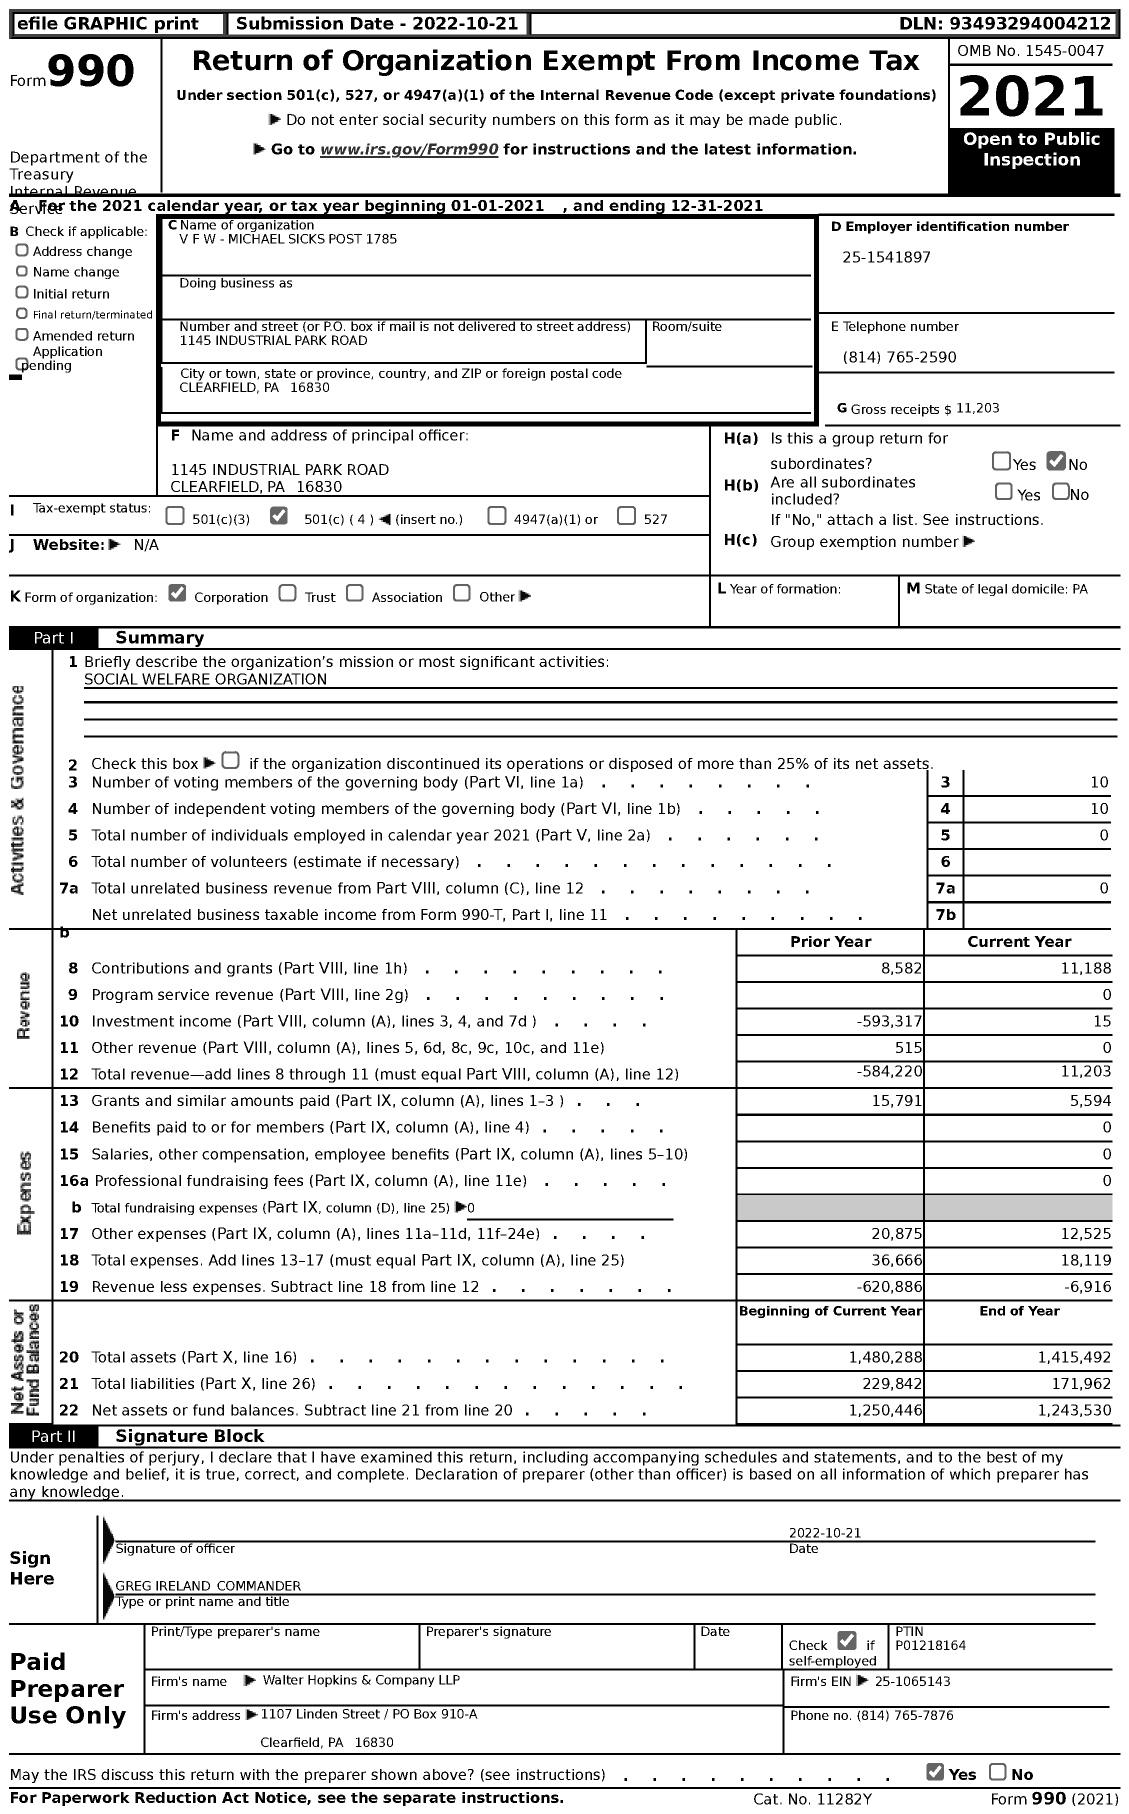 Image of first page of 2021 Form 990 for VFW Department of Pennsylvania - 1785 F Michael Sicks Post